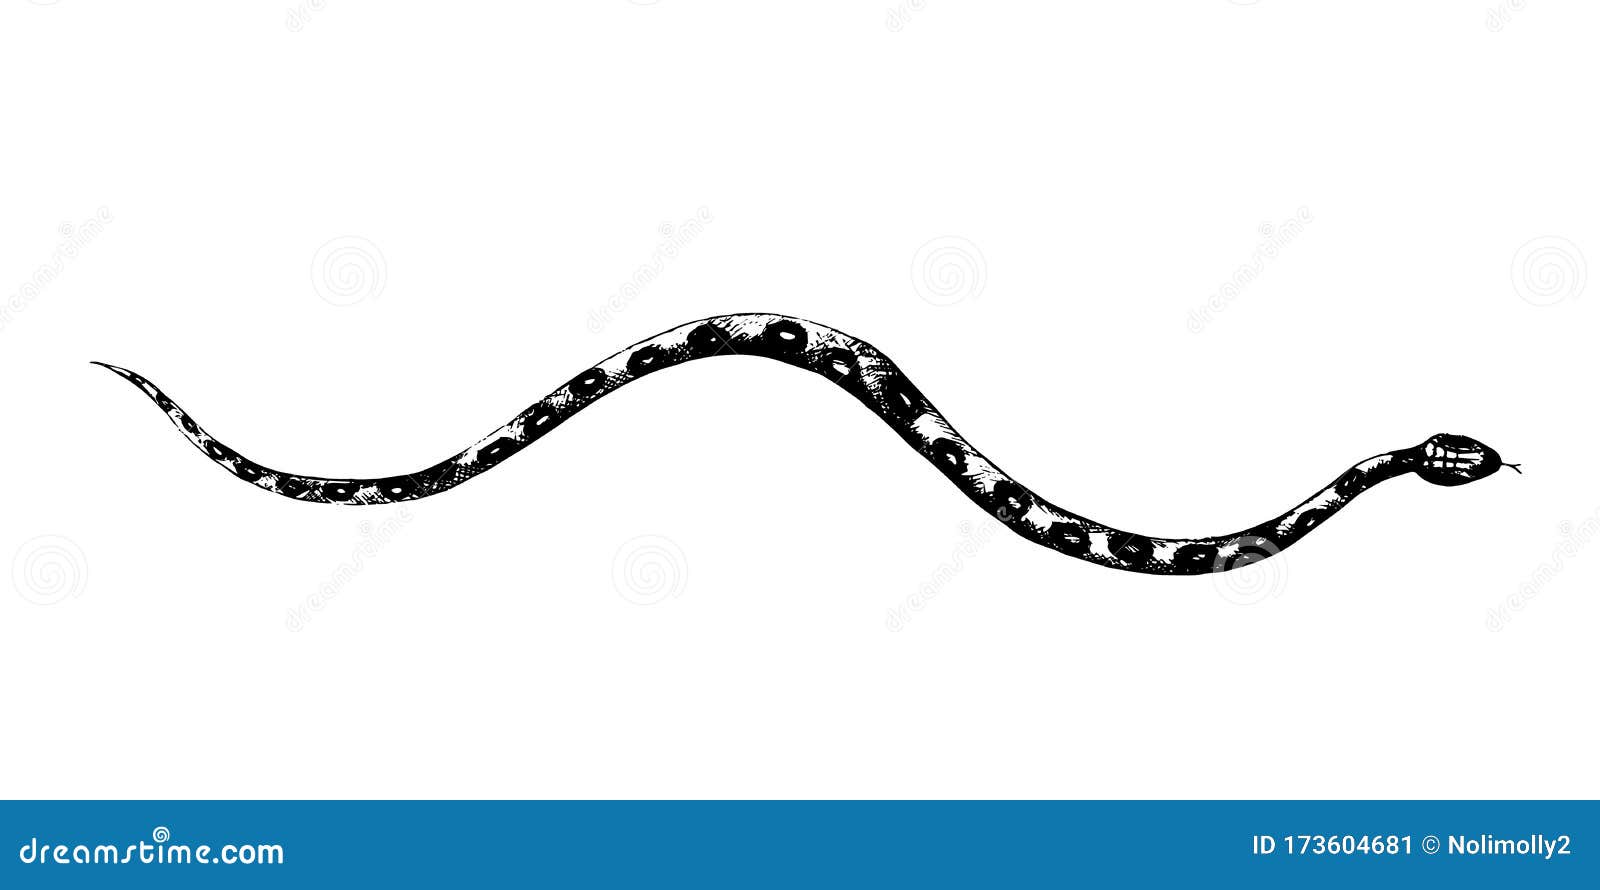 Vector Snakes Pencil Drawing, Vintage Style Graphic Black and ...